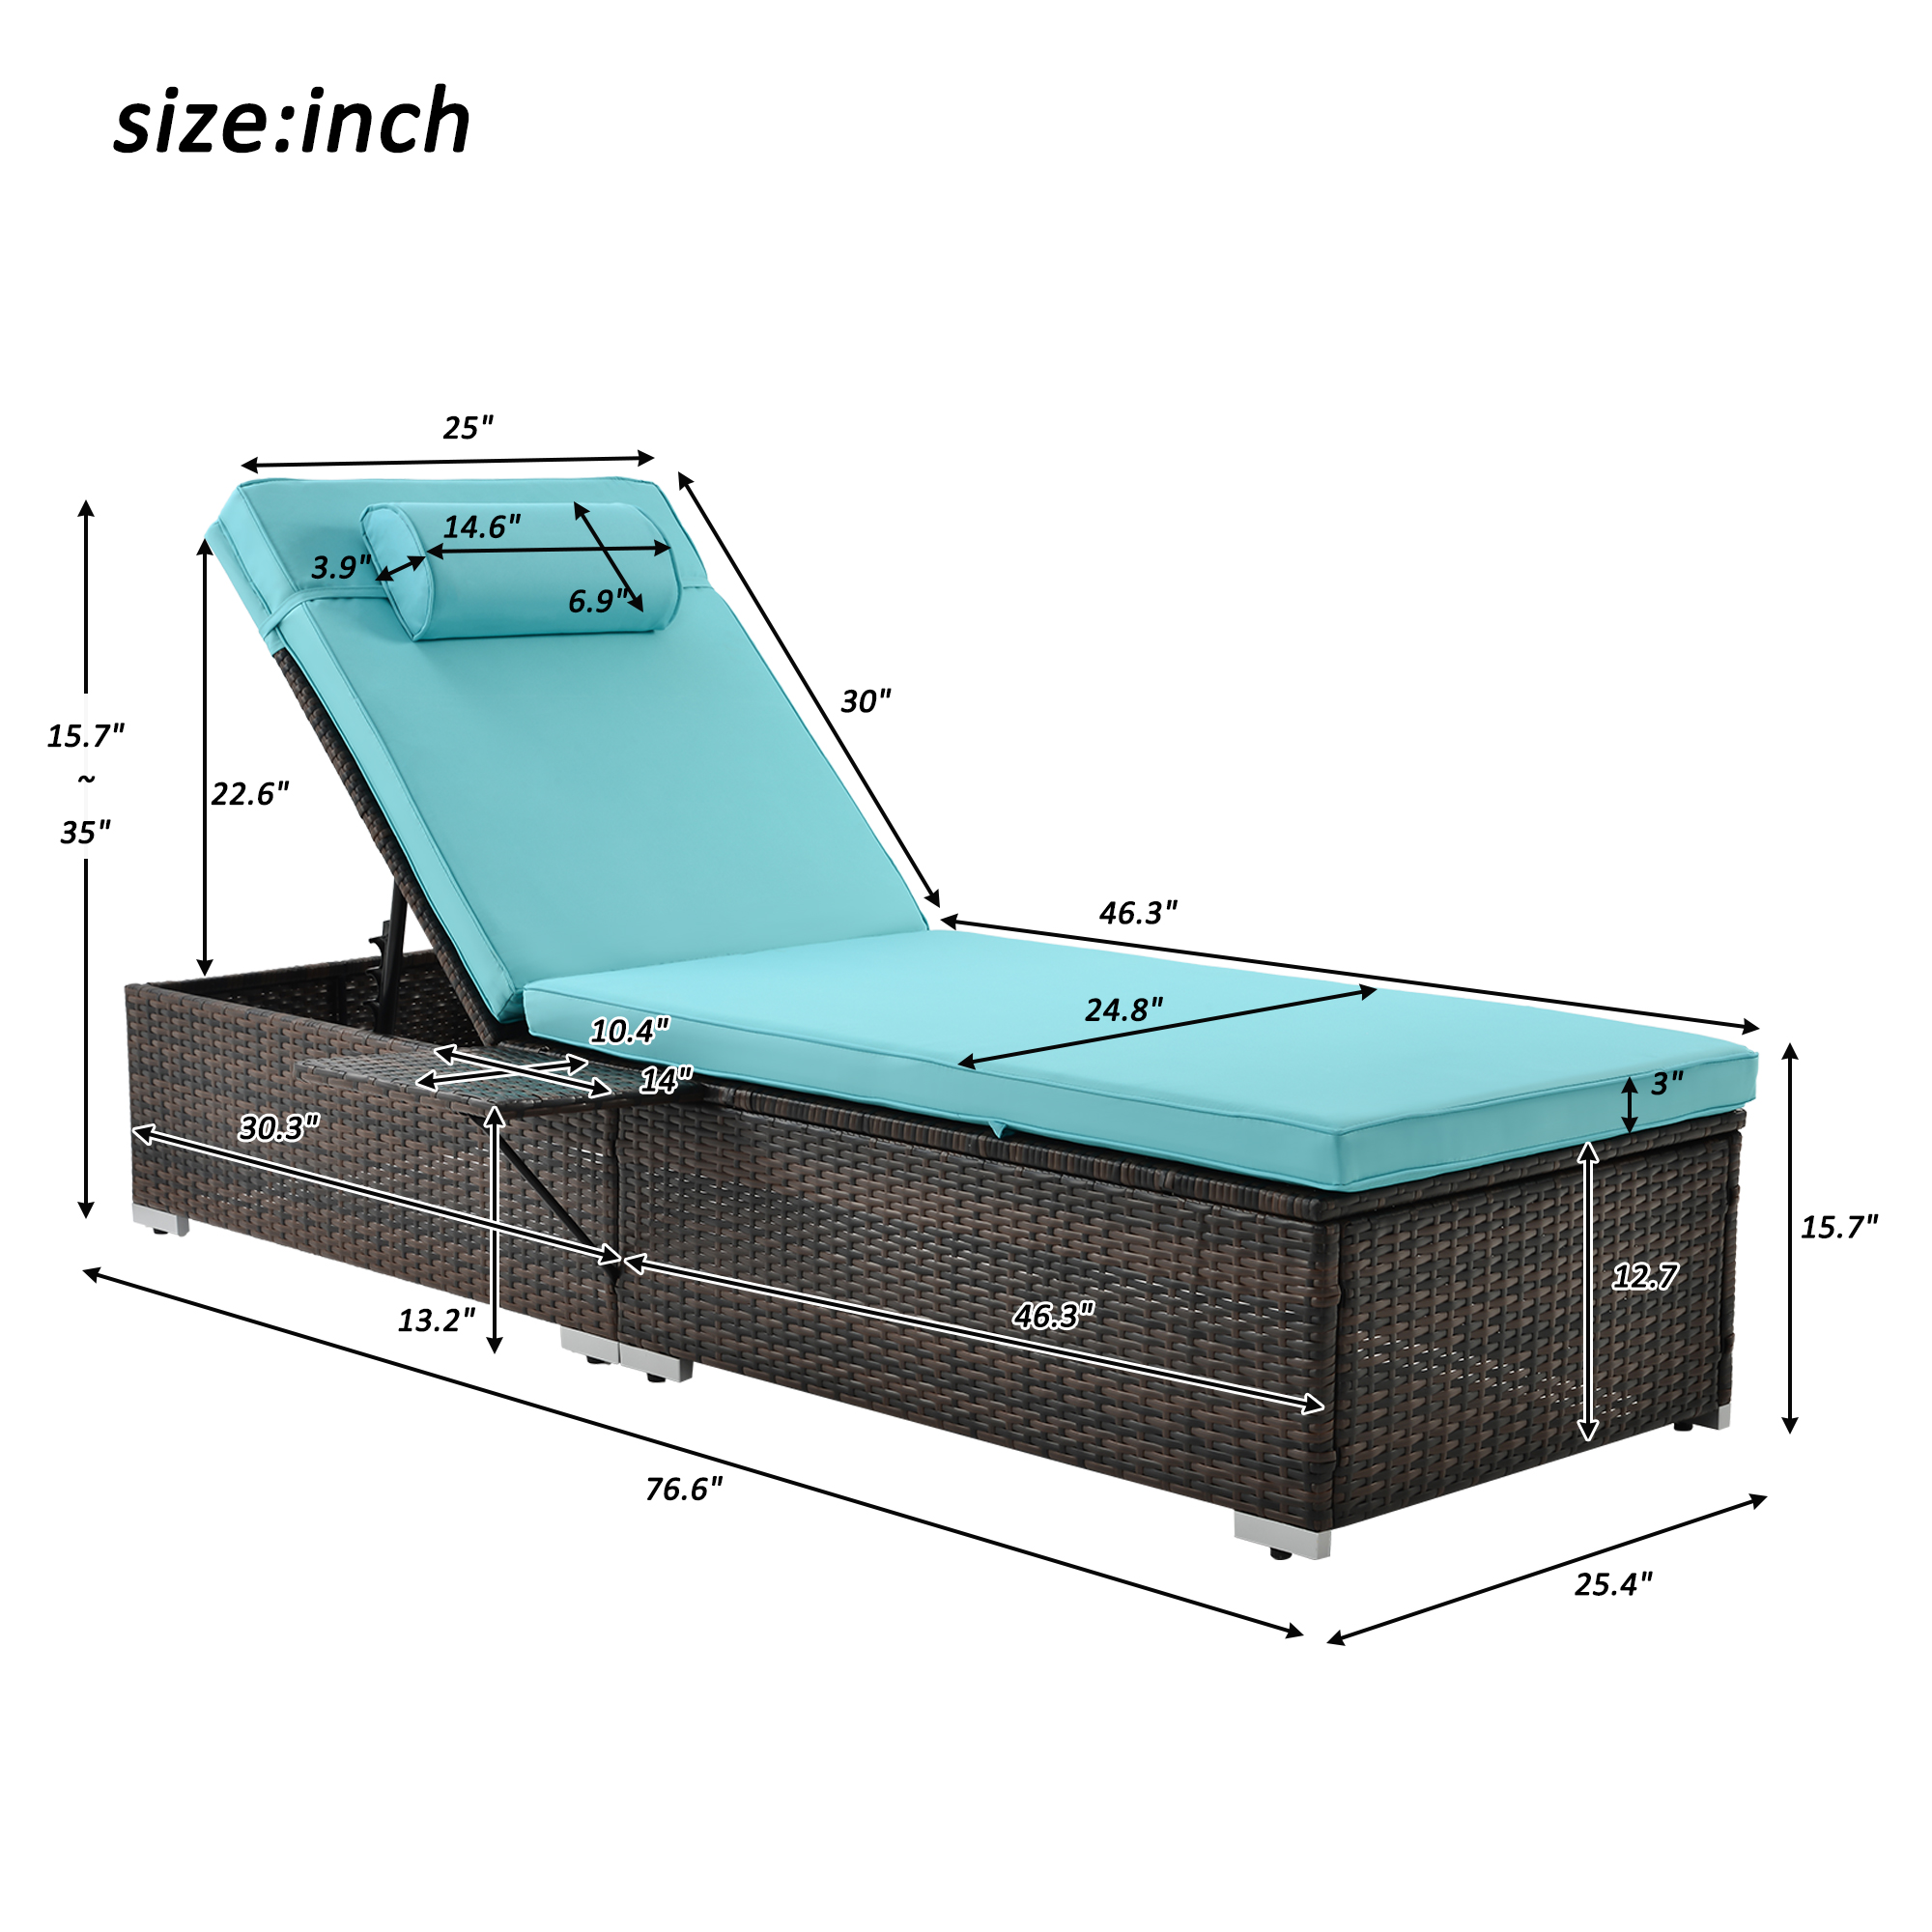 2 Piece Patio Chaise Lounge Furniture Set with Side Table, 5-Position Adjustable Cushioned Rattan Chaise Lounge with Head Pillow, PE Rattan Backrest Lounge Chairs Set for Pool Balcony Deck Yard, B21 - image 4 of 11